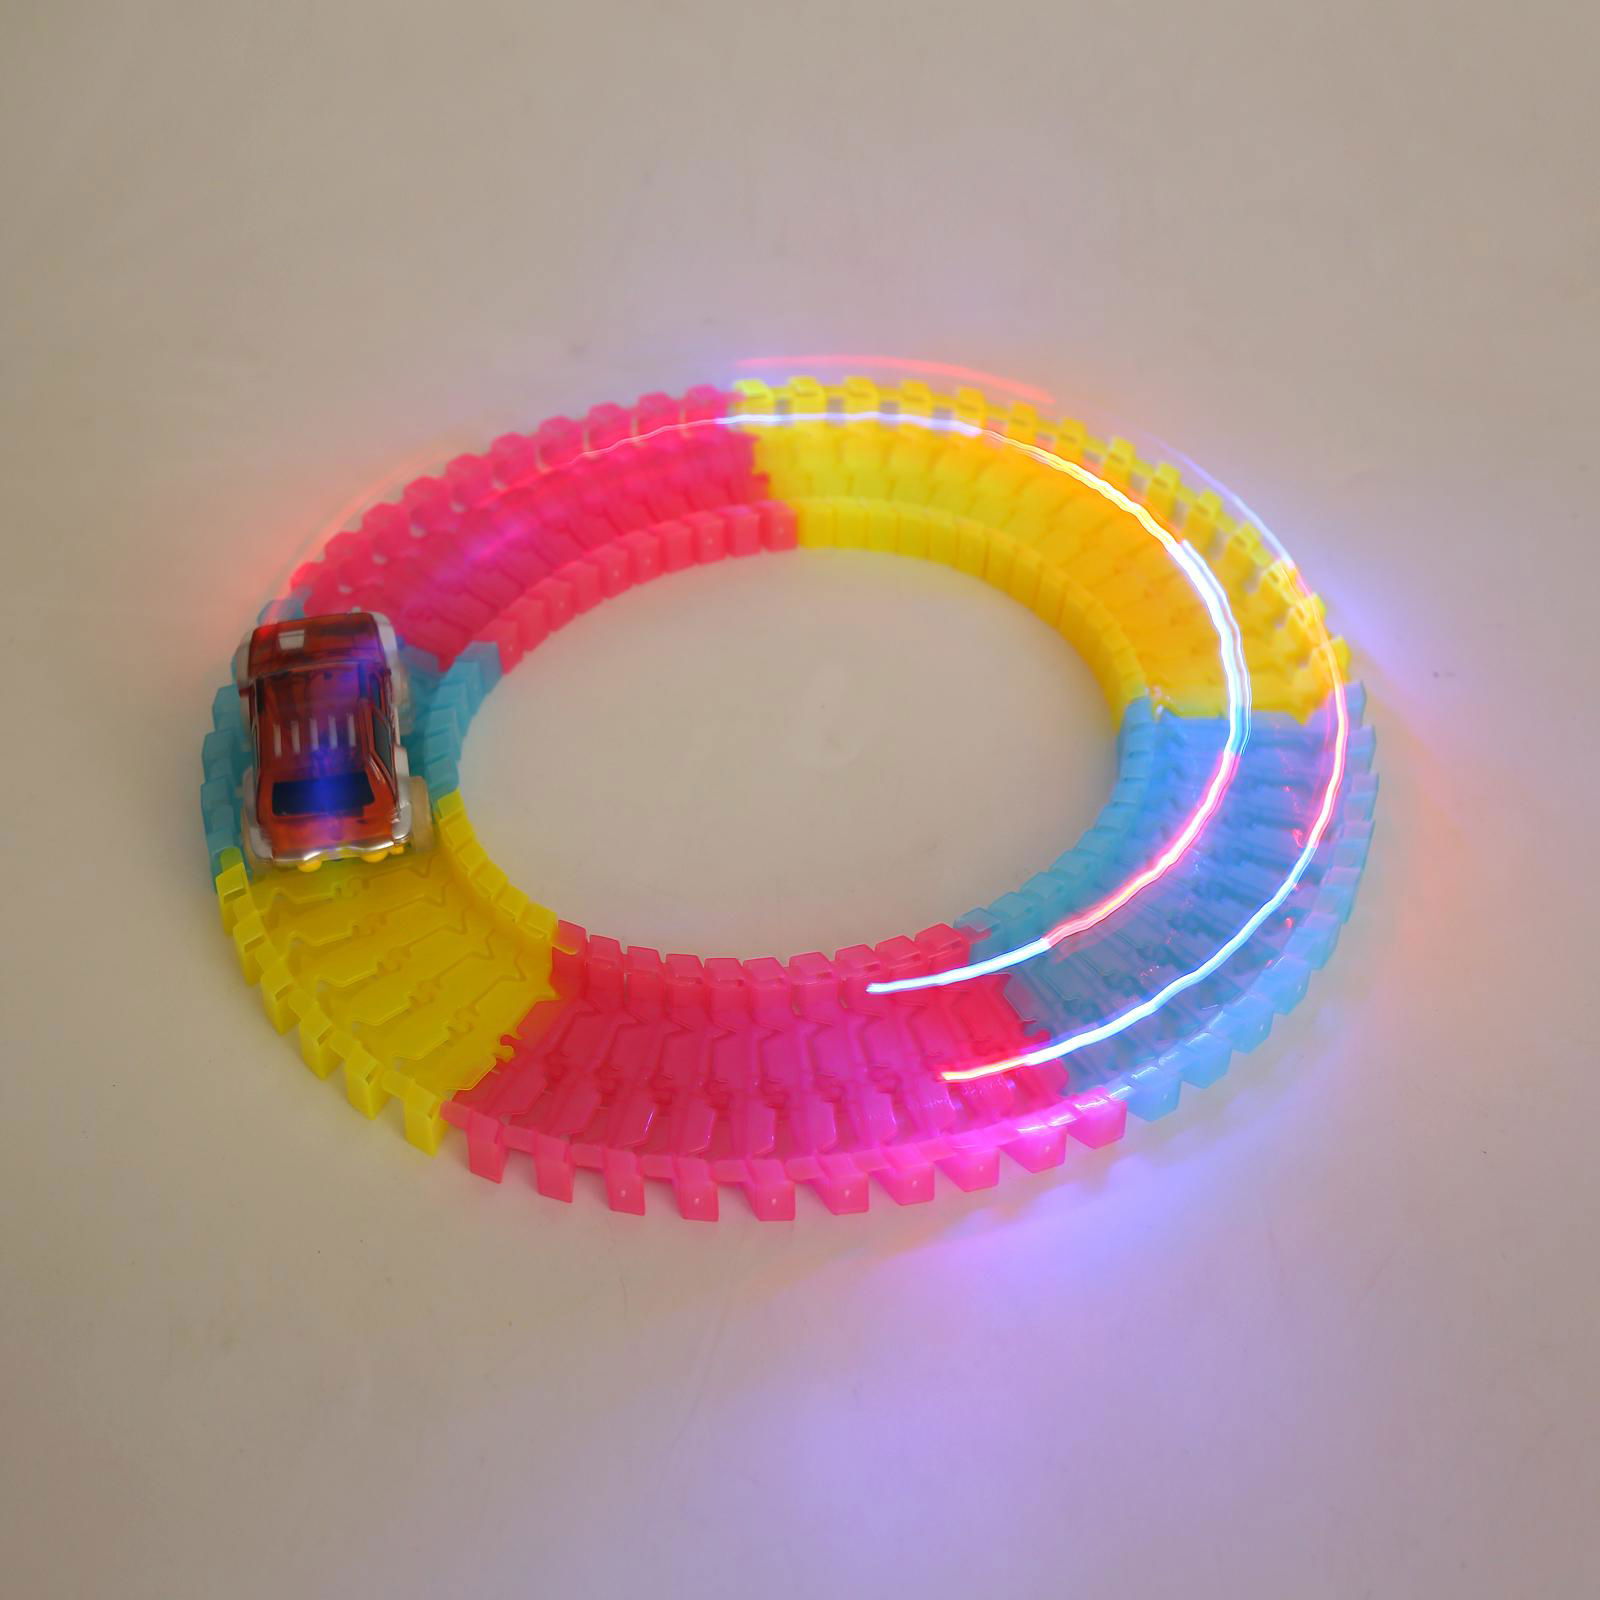 Magic track glow track racer racing track car toy 4